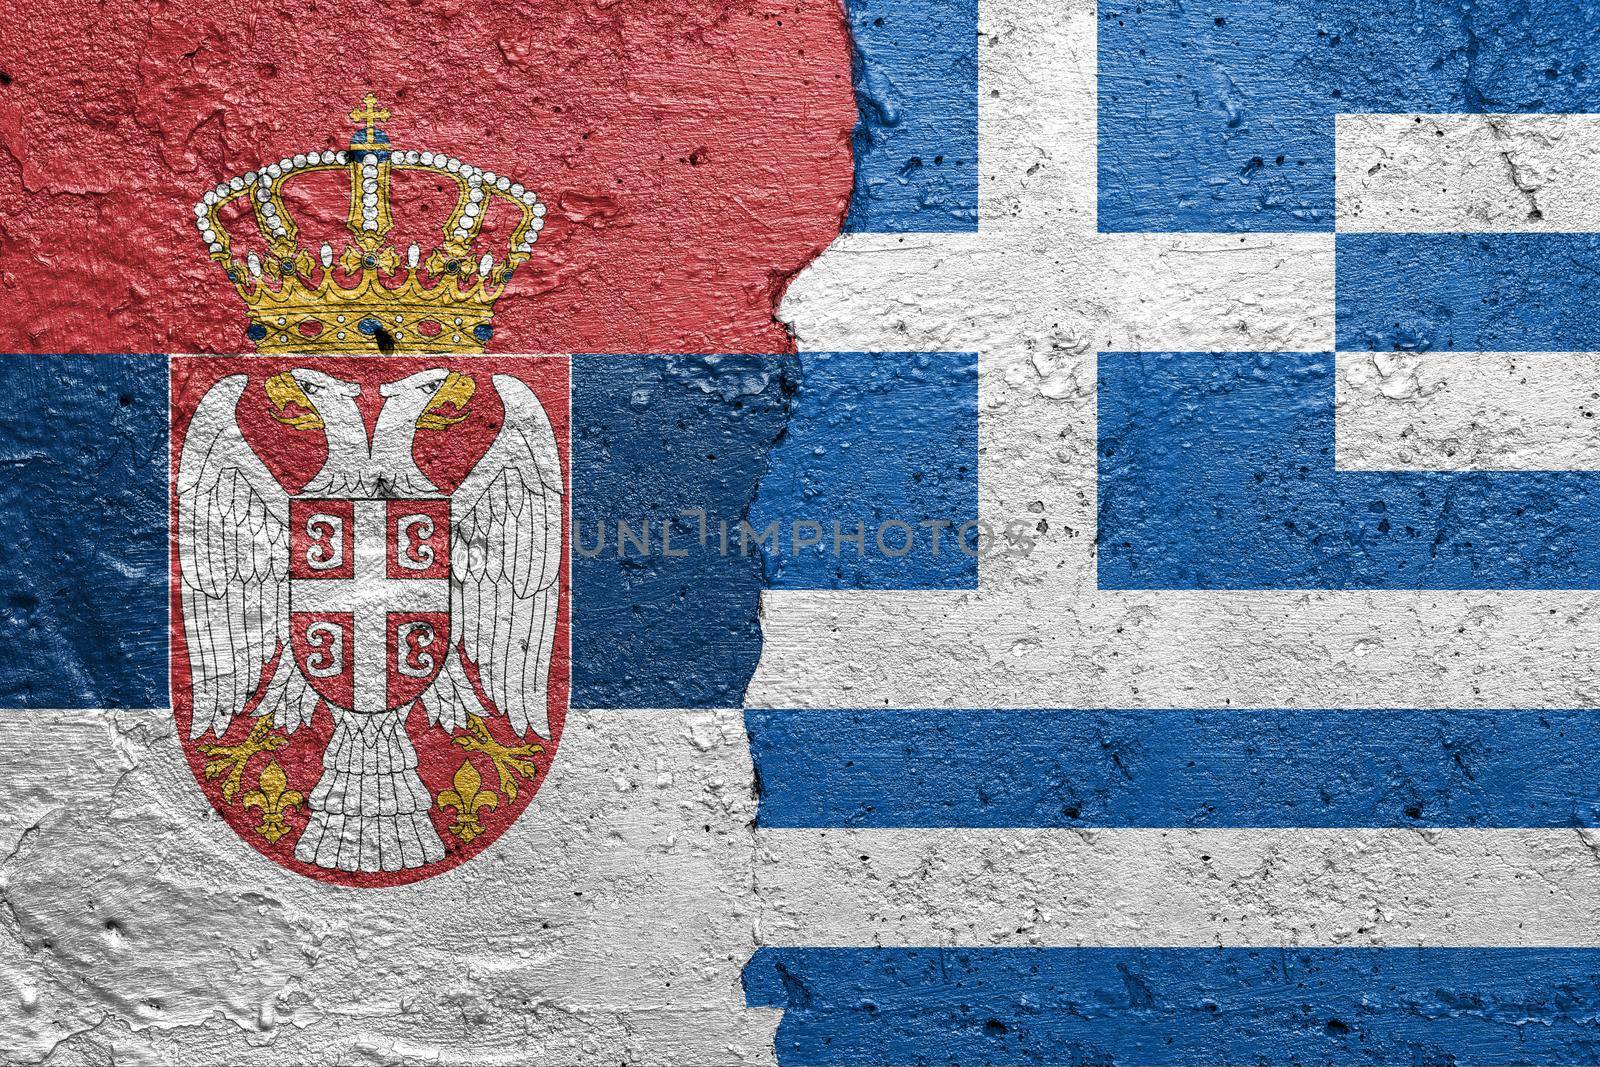 Serbia and Greece flags  - Cracked concrete wall painted with a Serbian flag on the left and a Greek flag on the right